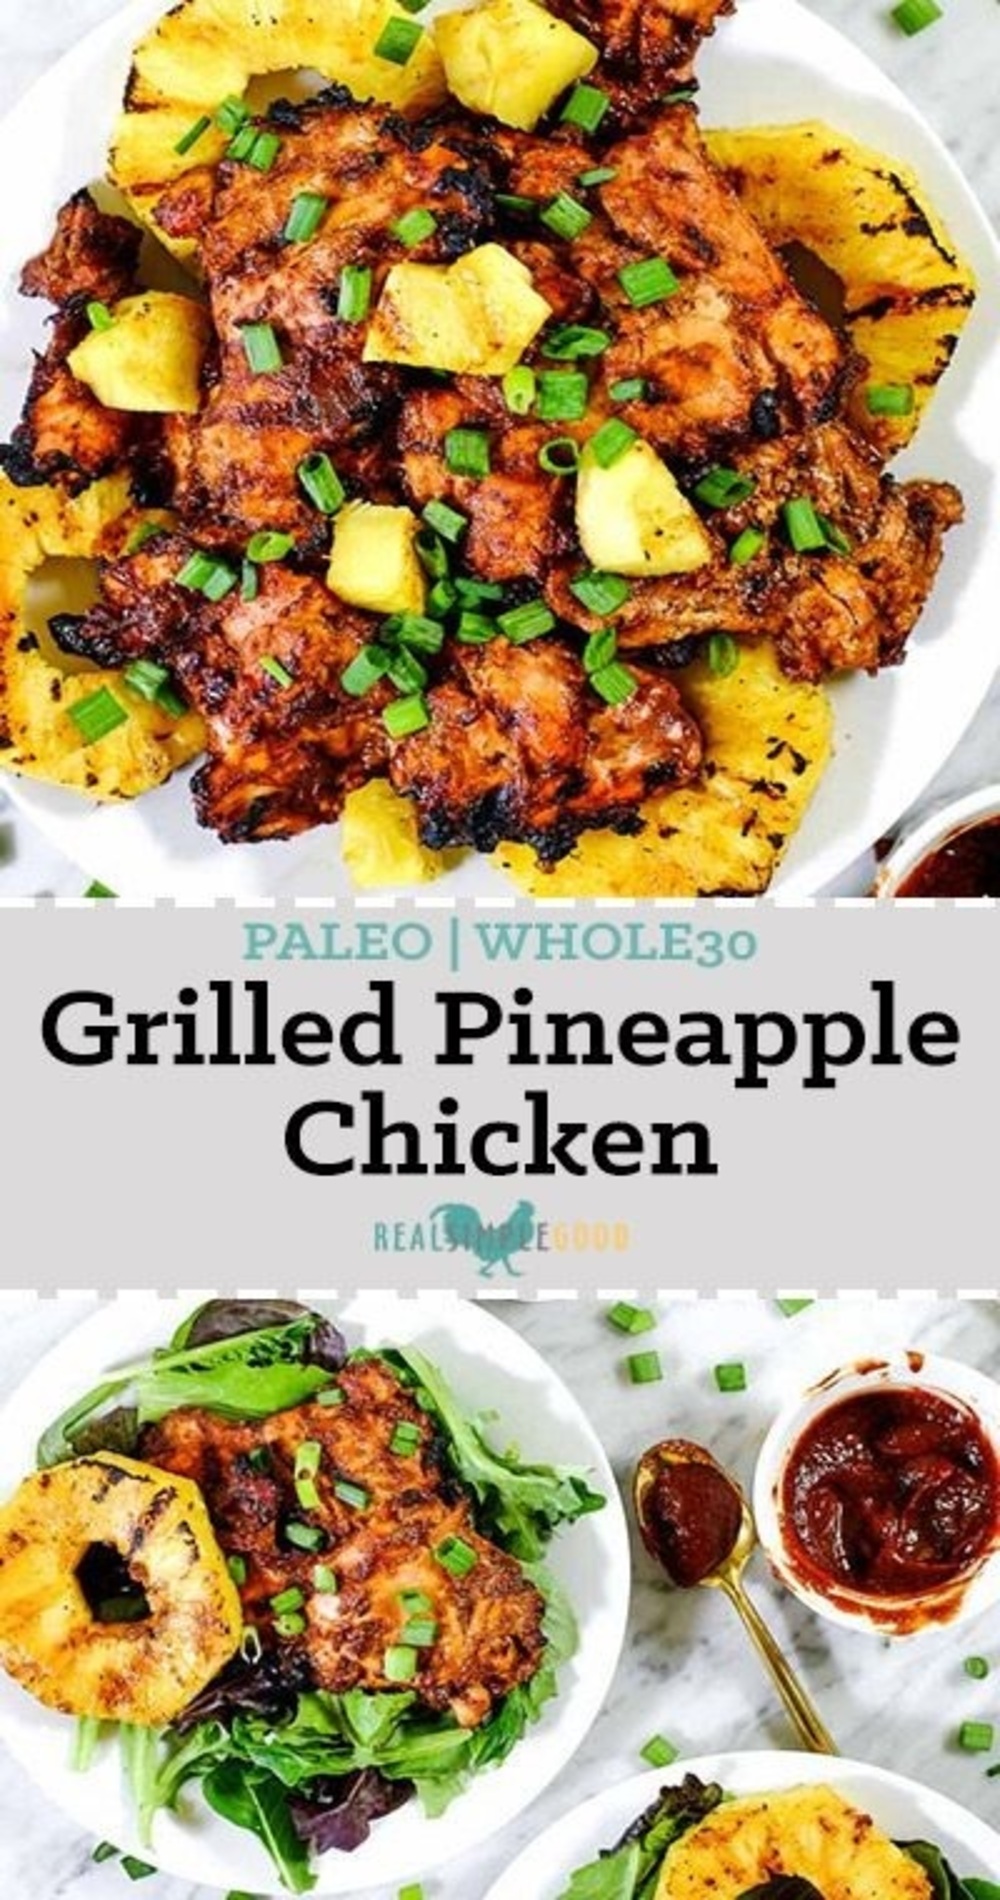 Grilled Pineapple Chicken